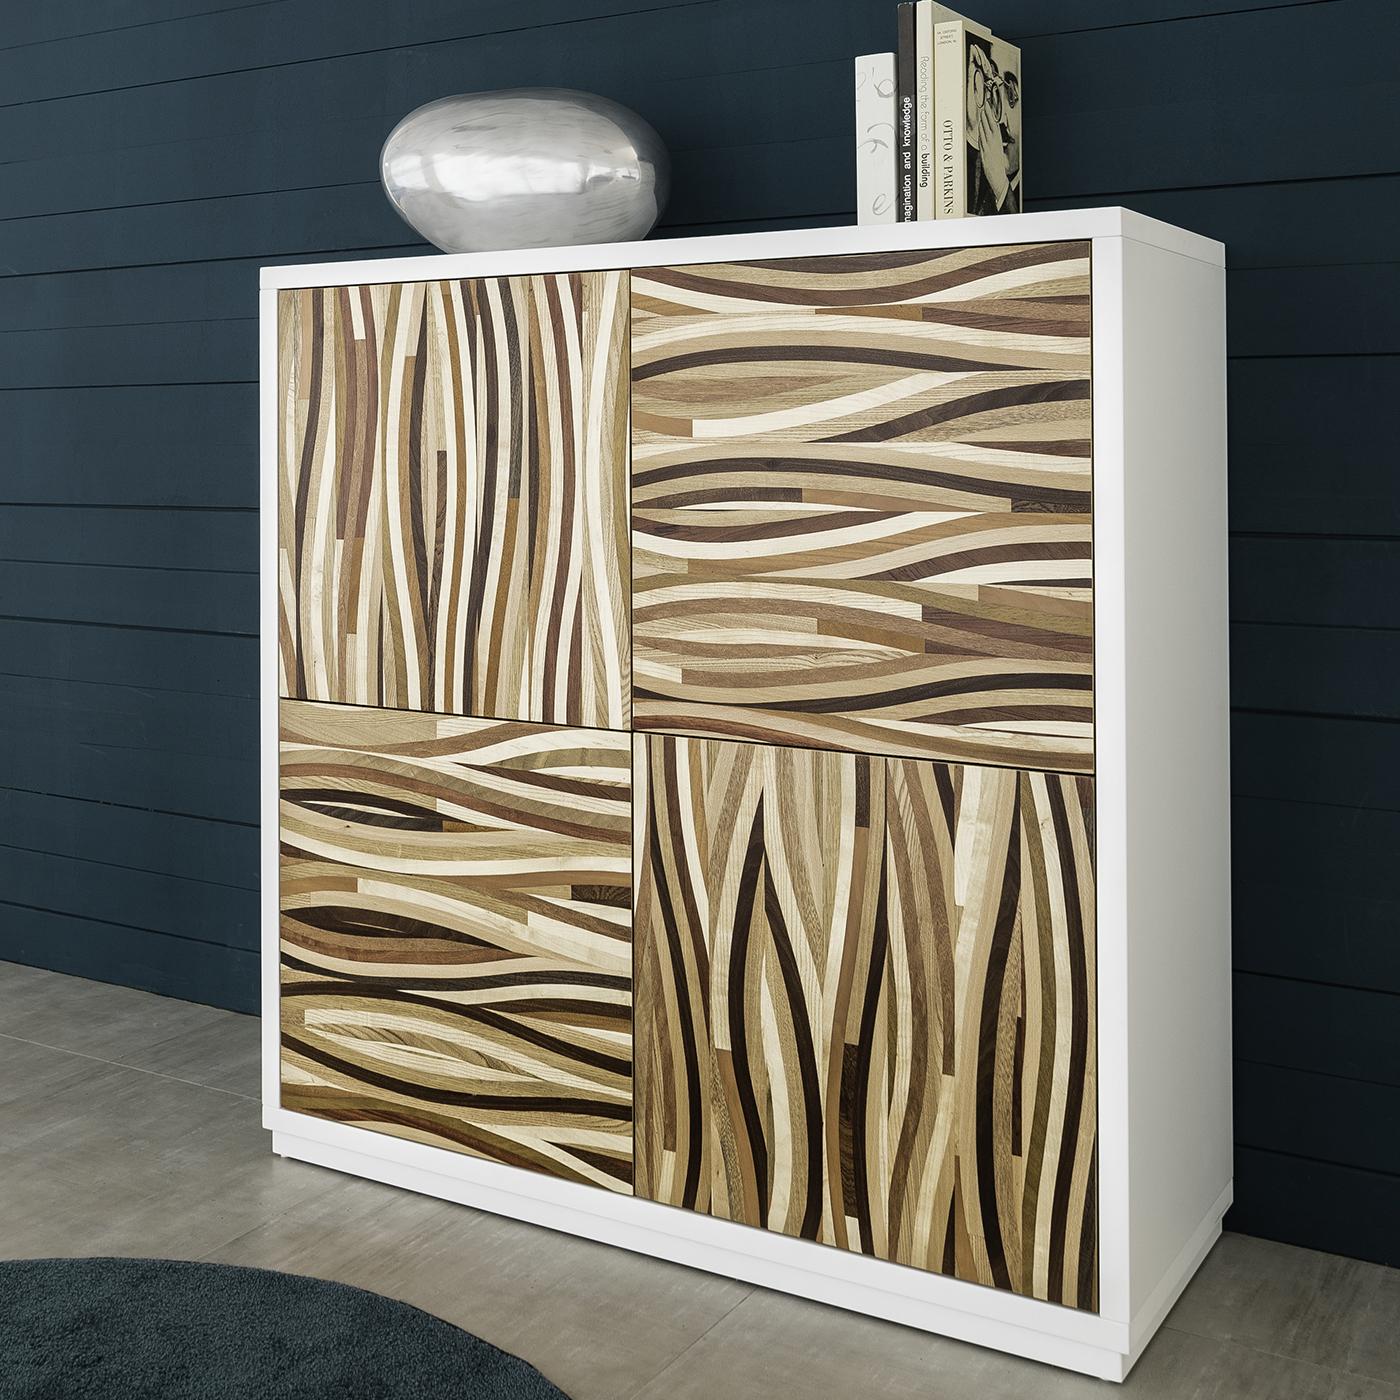 This superb sideboard combines a linear silhouette with a striking decorative accent for a unique object of functional decor. Entirely crafted of wood, the structure is lacquered in glossy white, creating a clean frame for the four panels. These